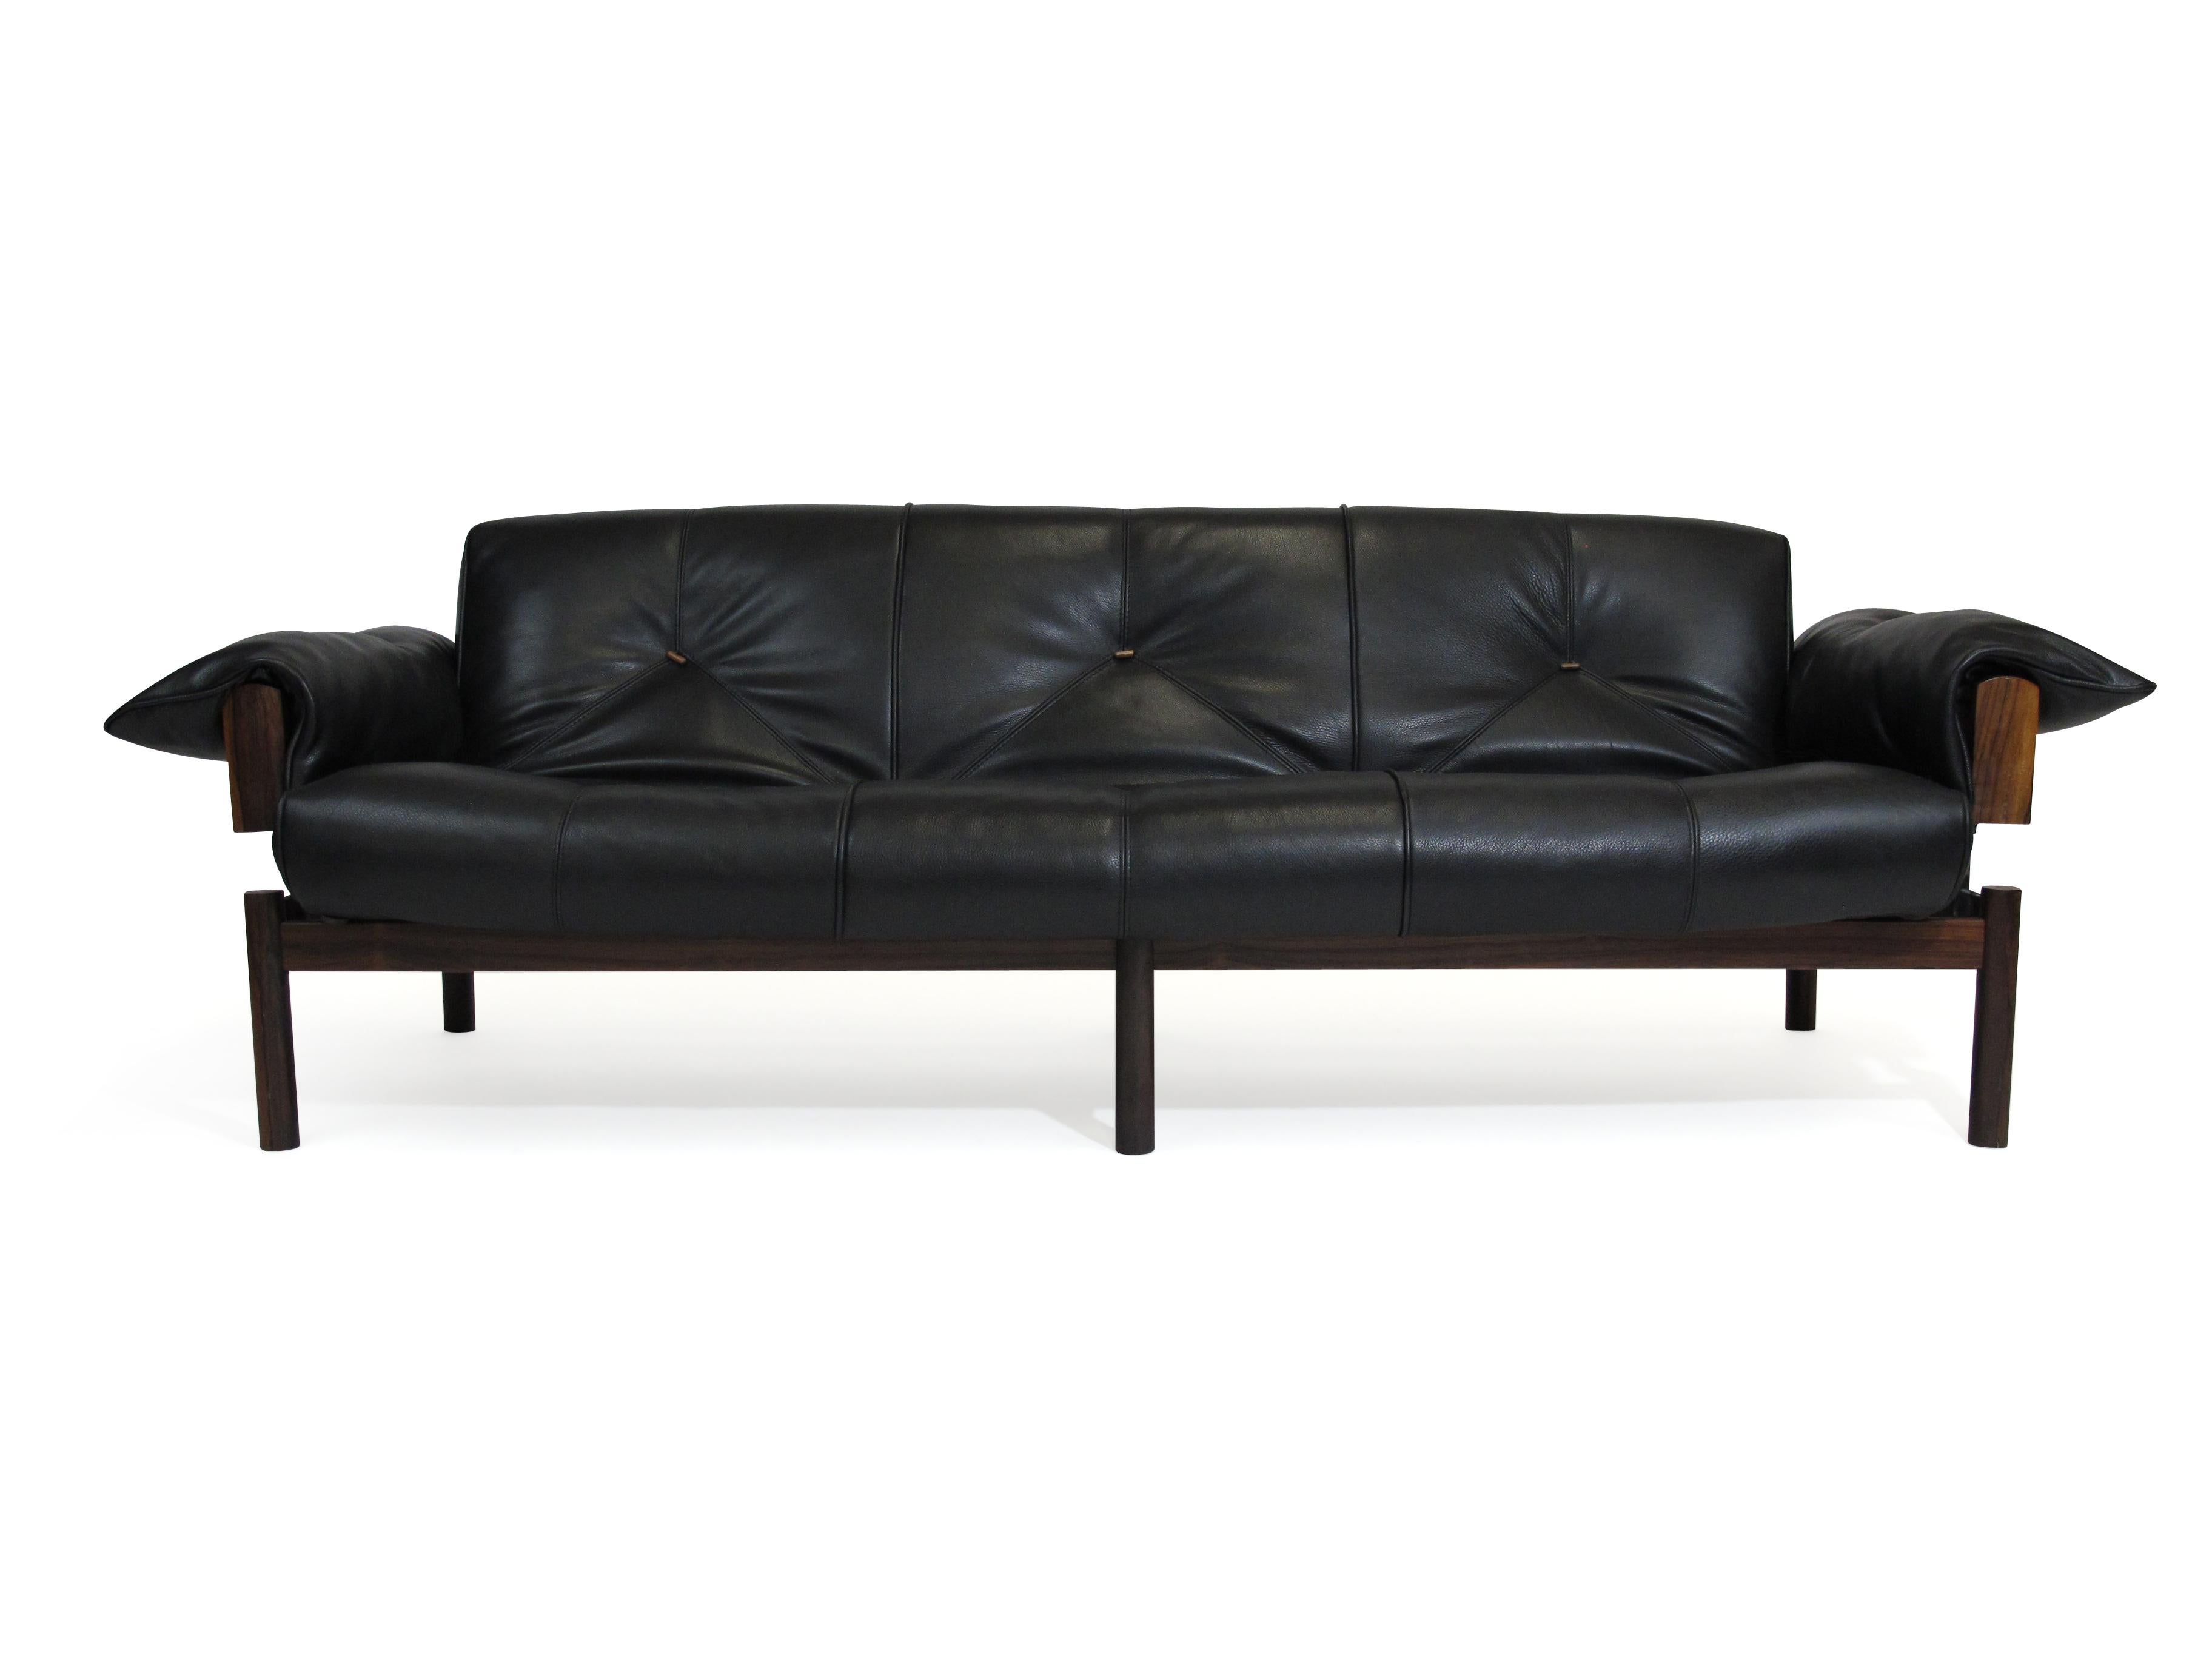 1960 Percival Lafer Brazilian Rosewood Sofa and Chair in Black Leather 6